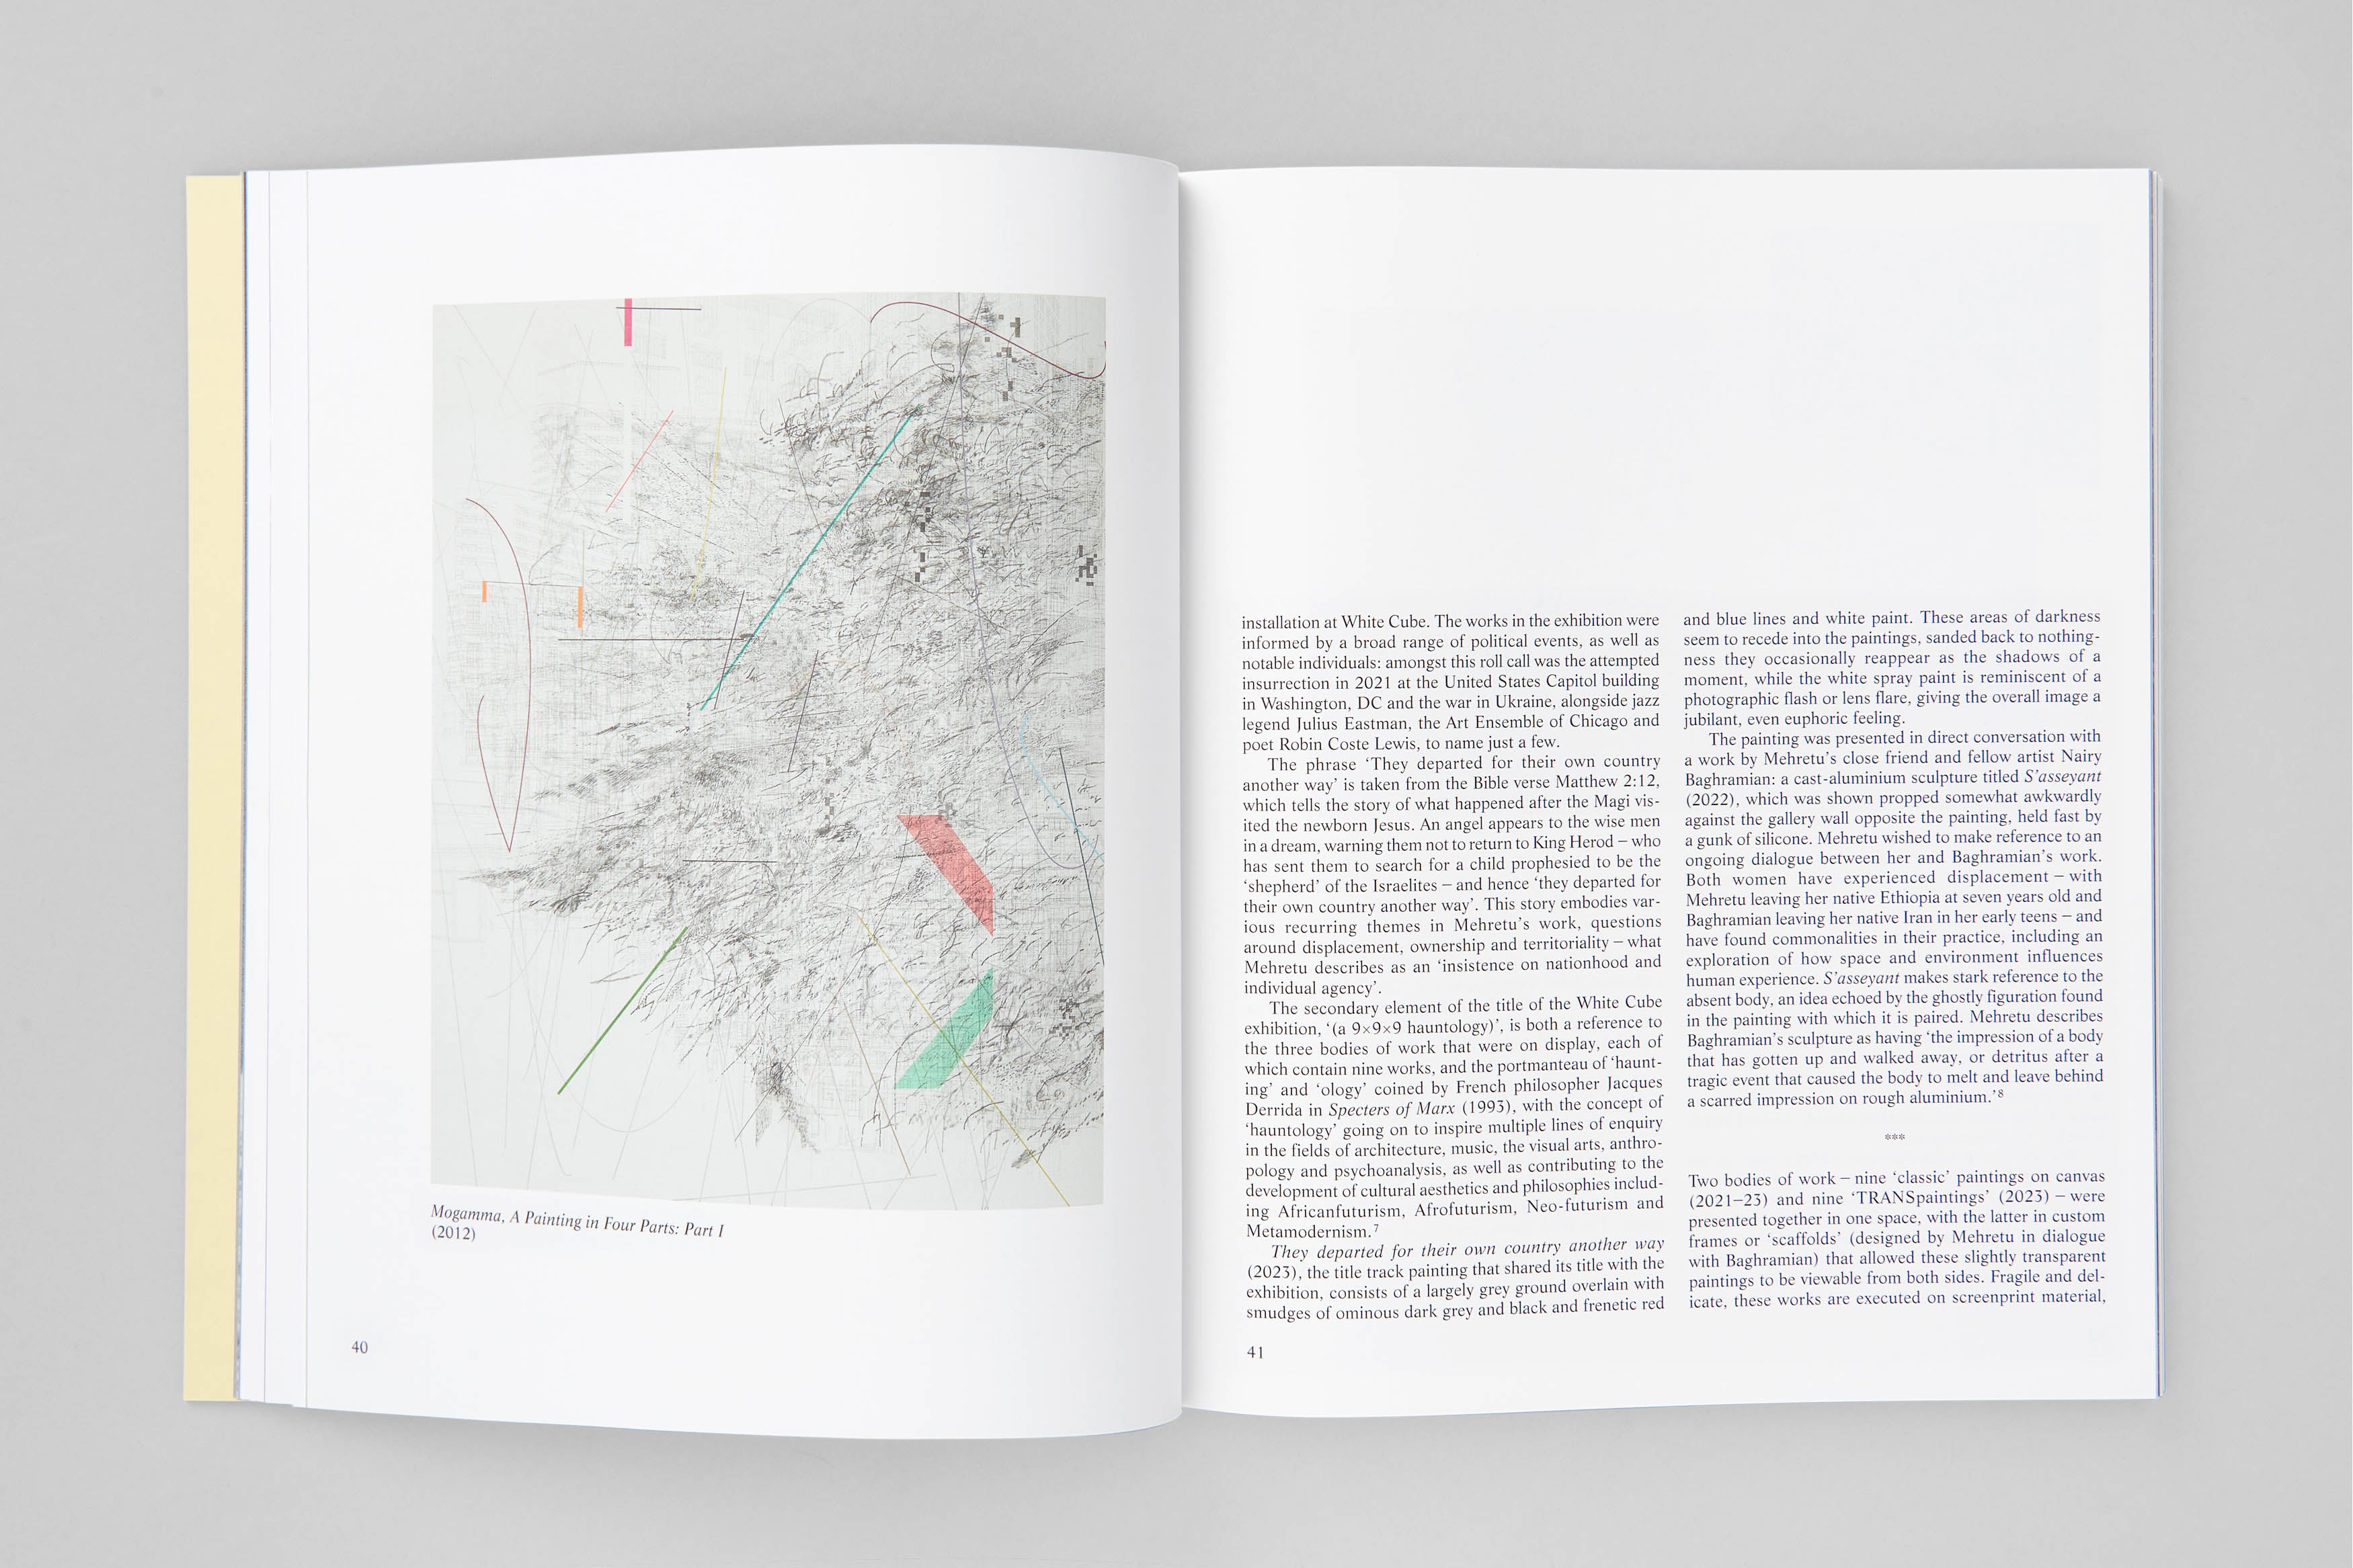 Julie Mehretu 'They departed for their own country another way (a 9x9x9 hauntology)' (2024)